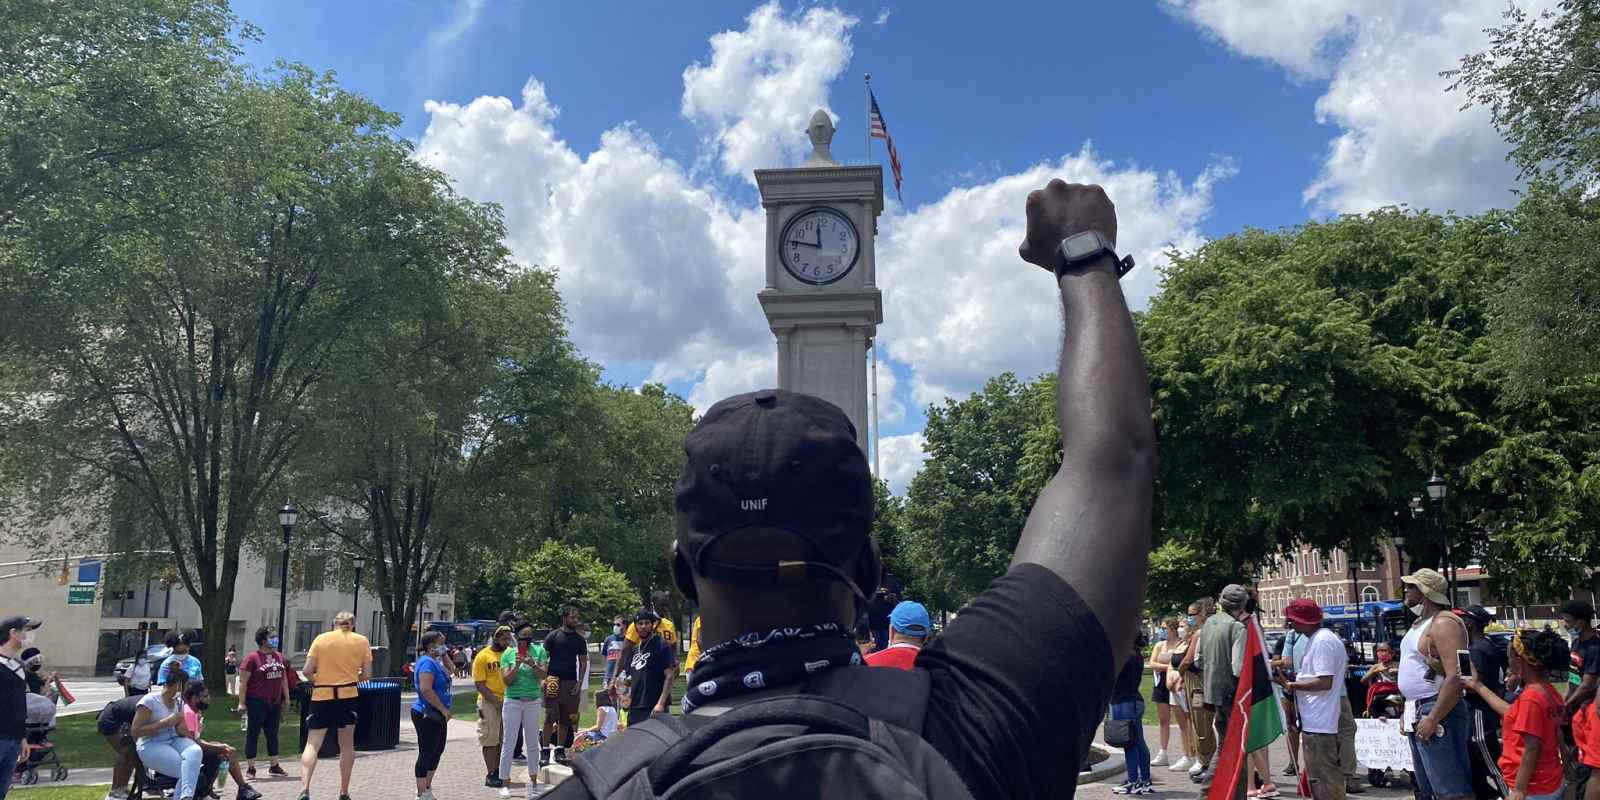 A Black man stands with his fist raised in the air.